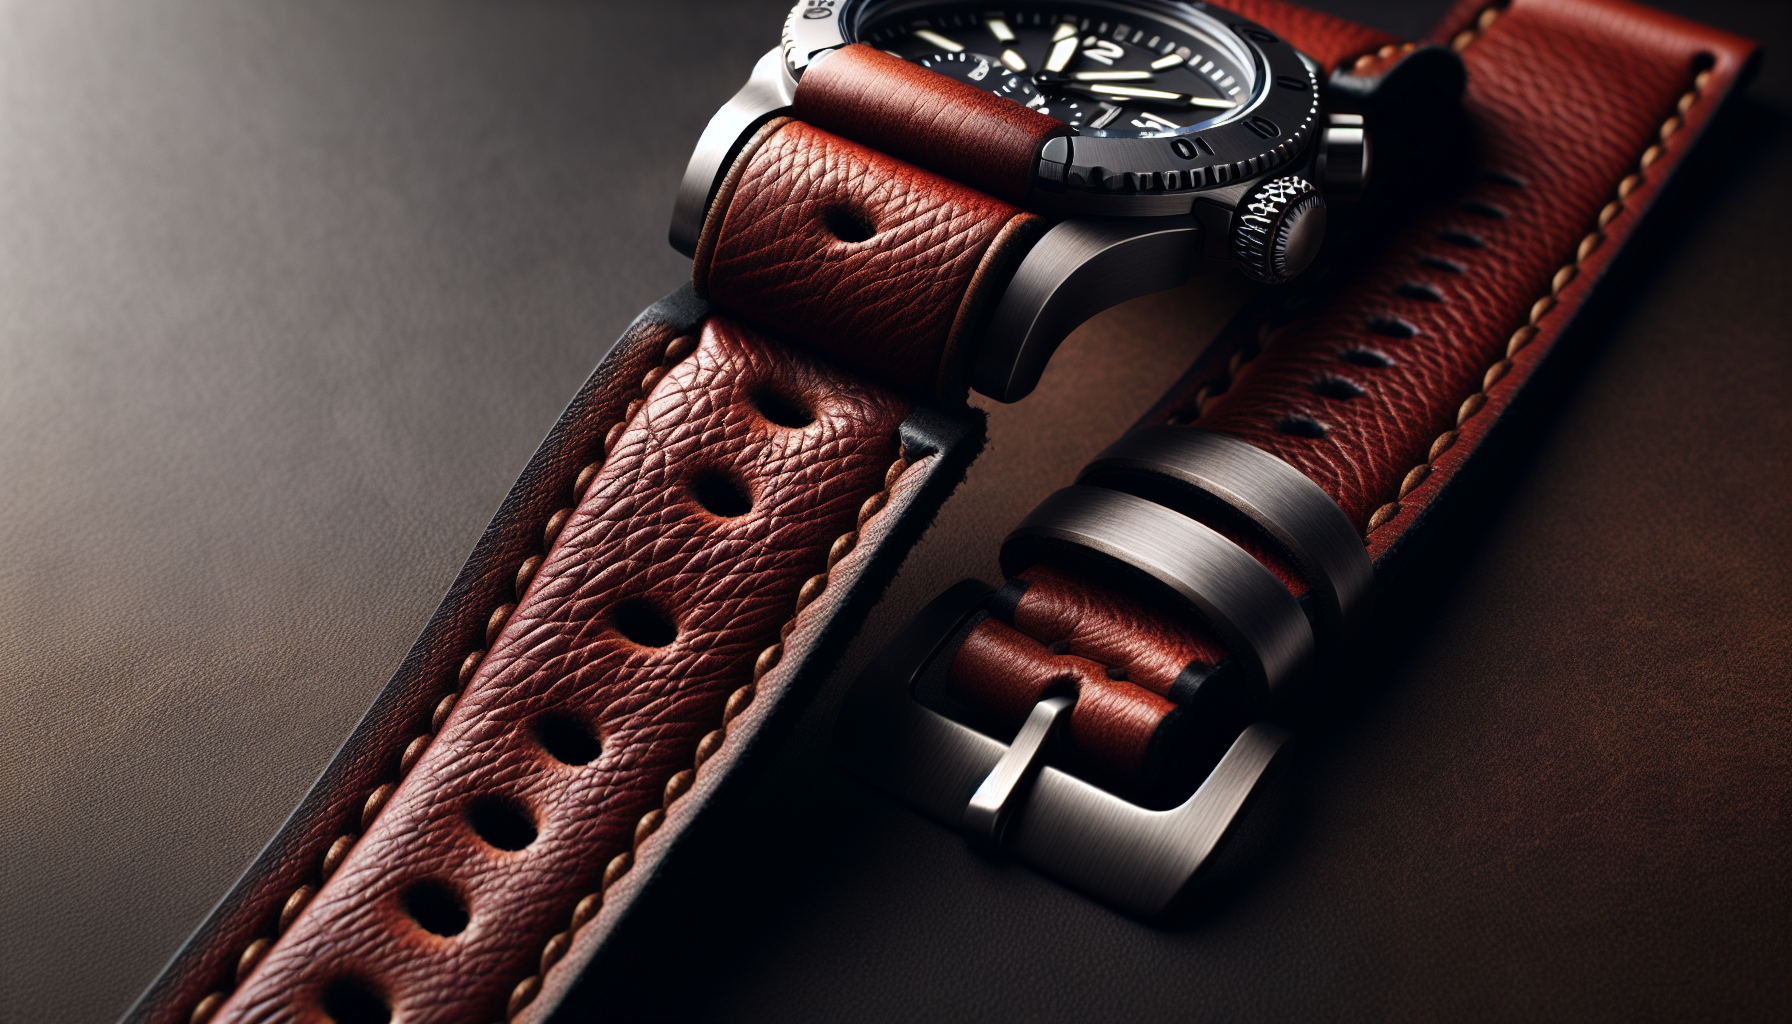 Close-up of a full-grain leather watch band with exquisite craftsmanship